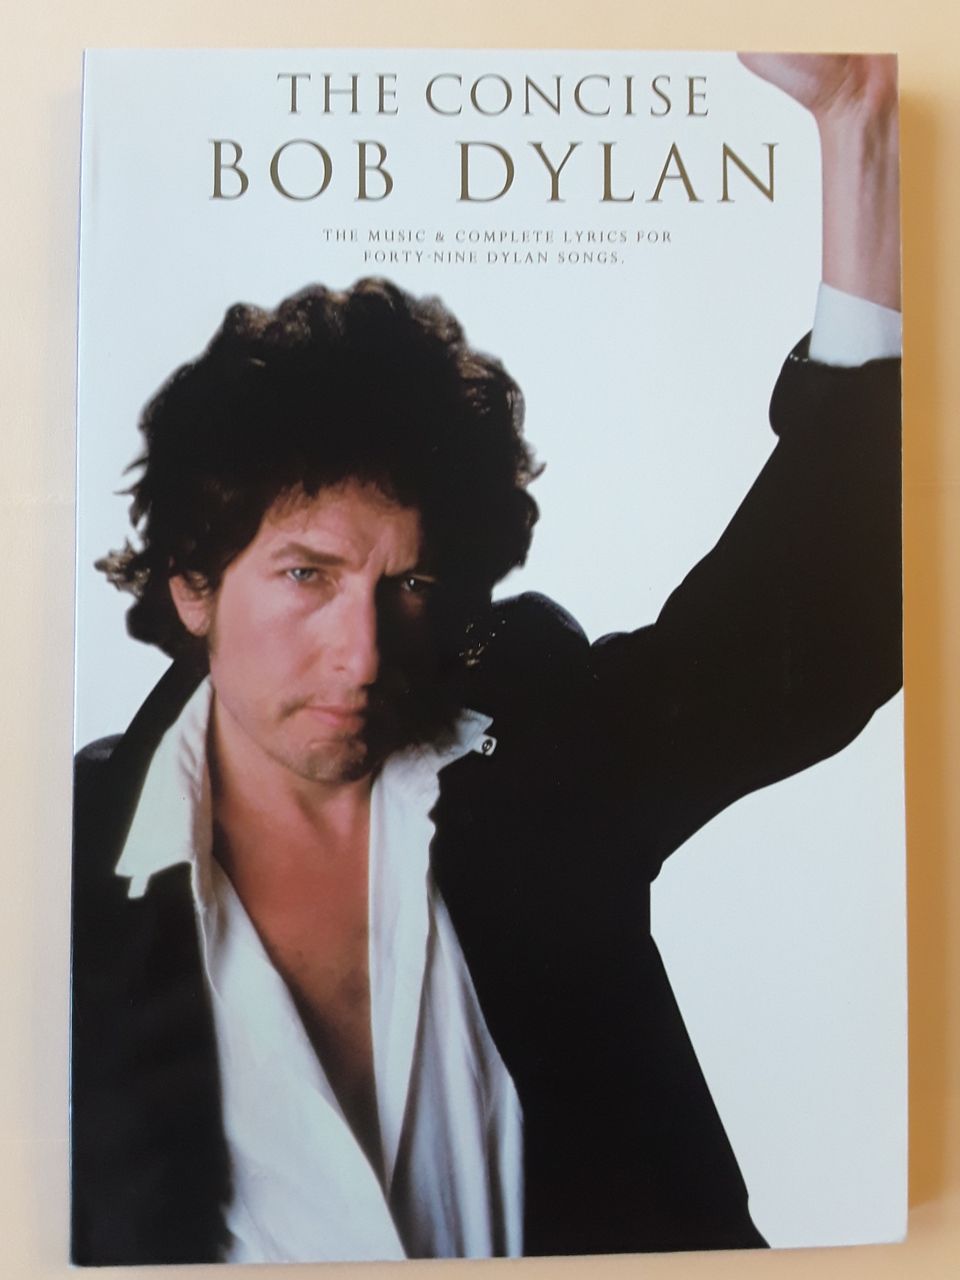 Nuotti: The Concise Bob Dylan